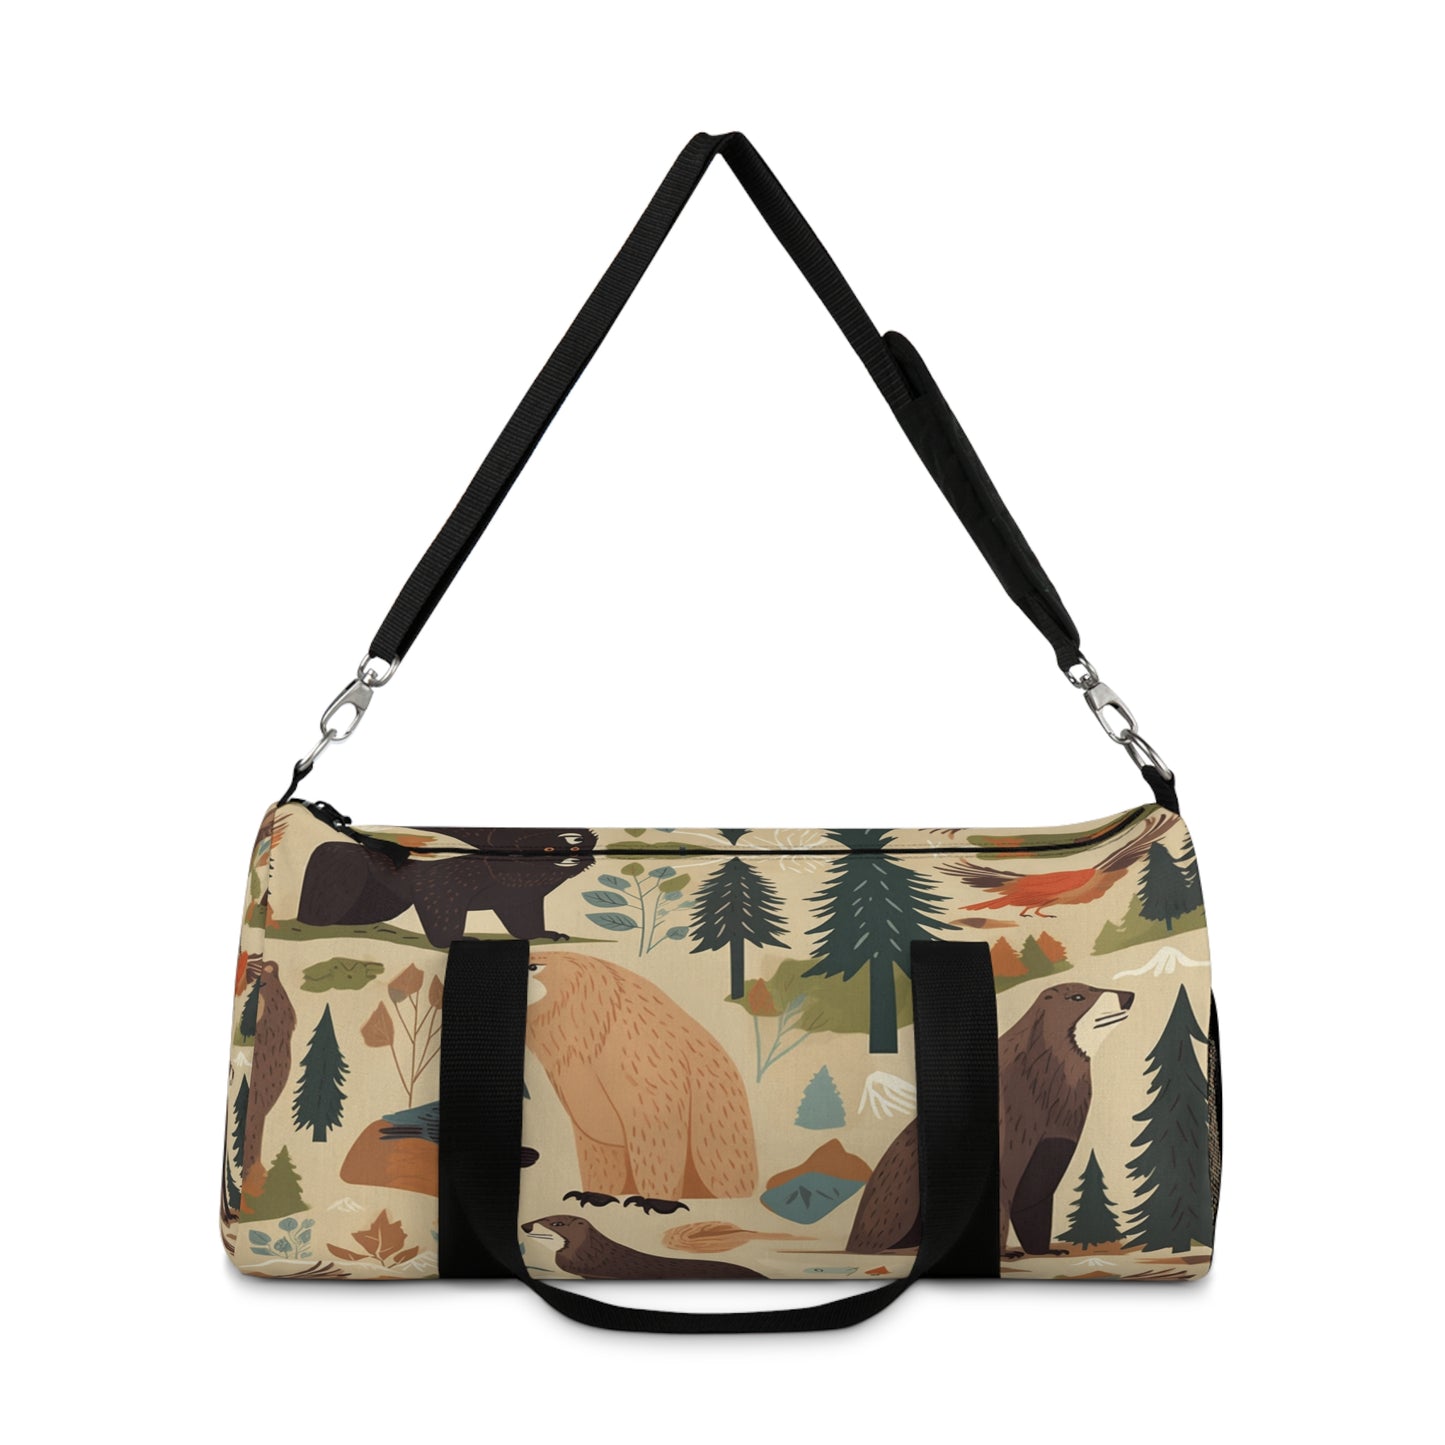 U.S. Wilderness Inspired: Grizzly Bears, Animals Pattern Duffel Bag